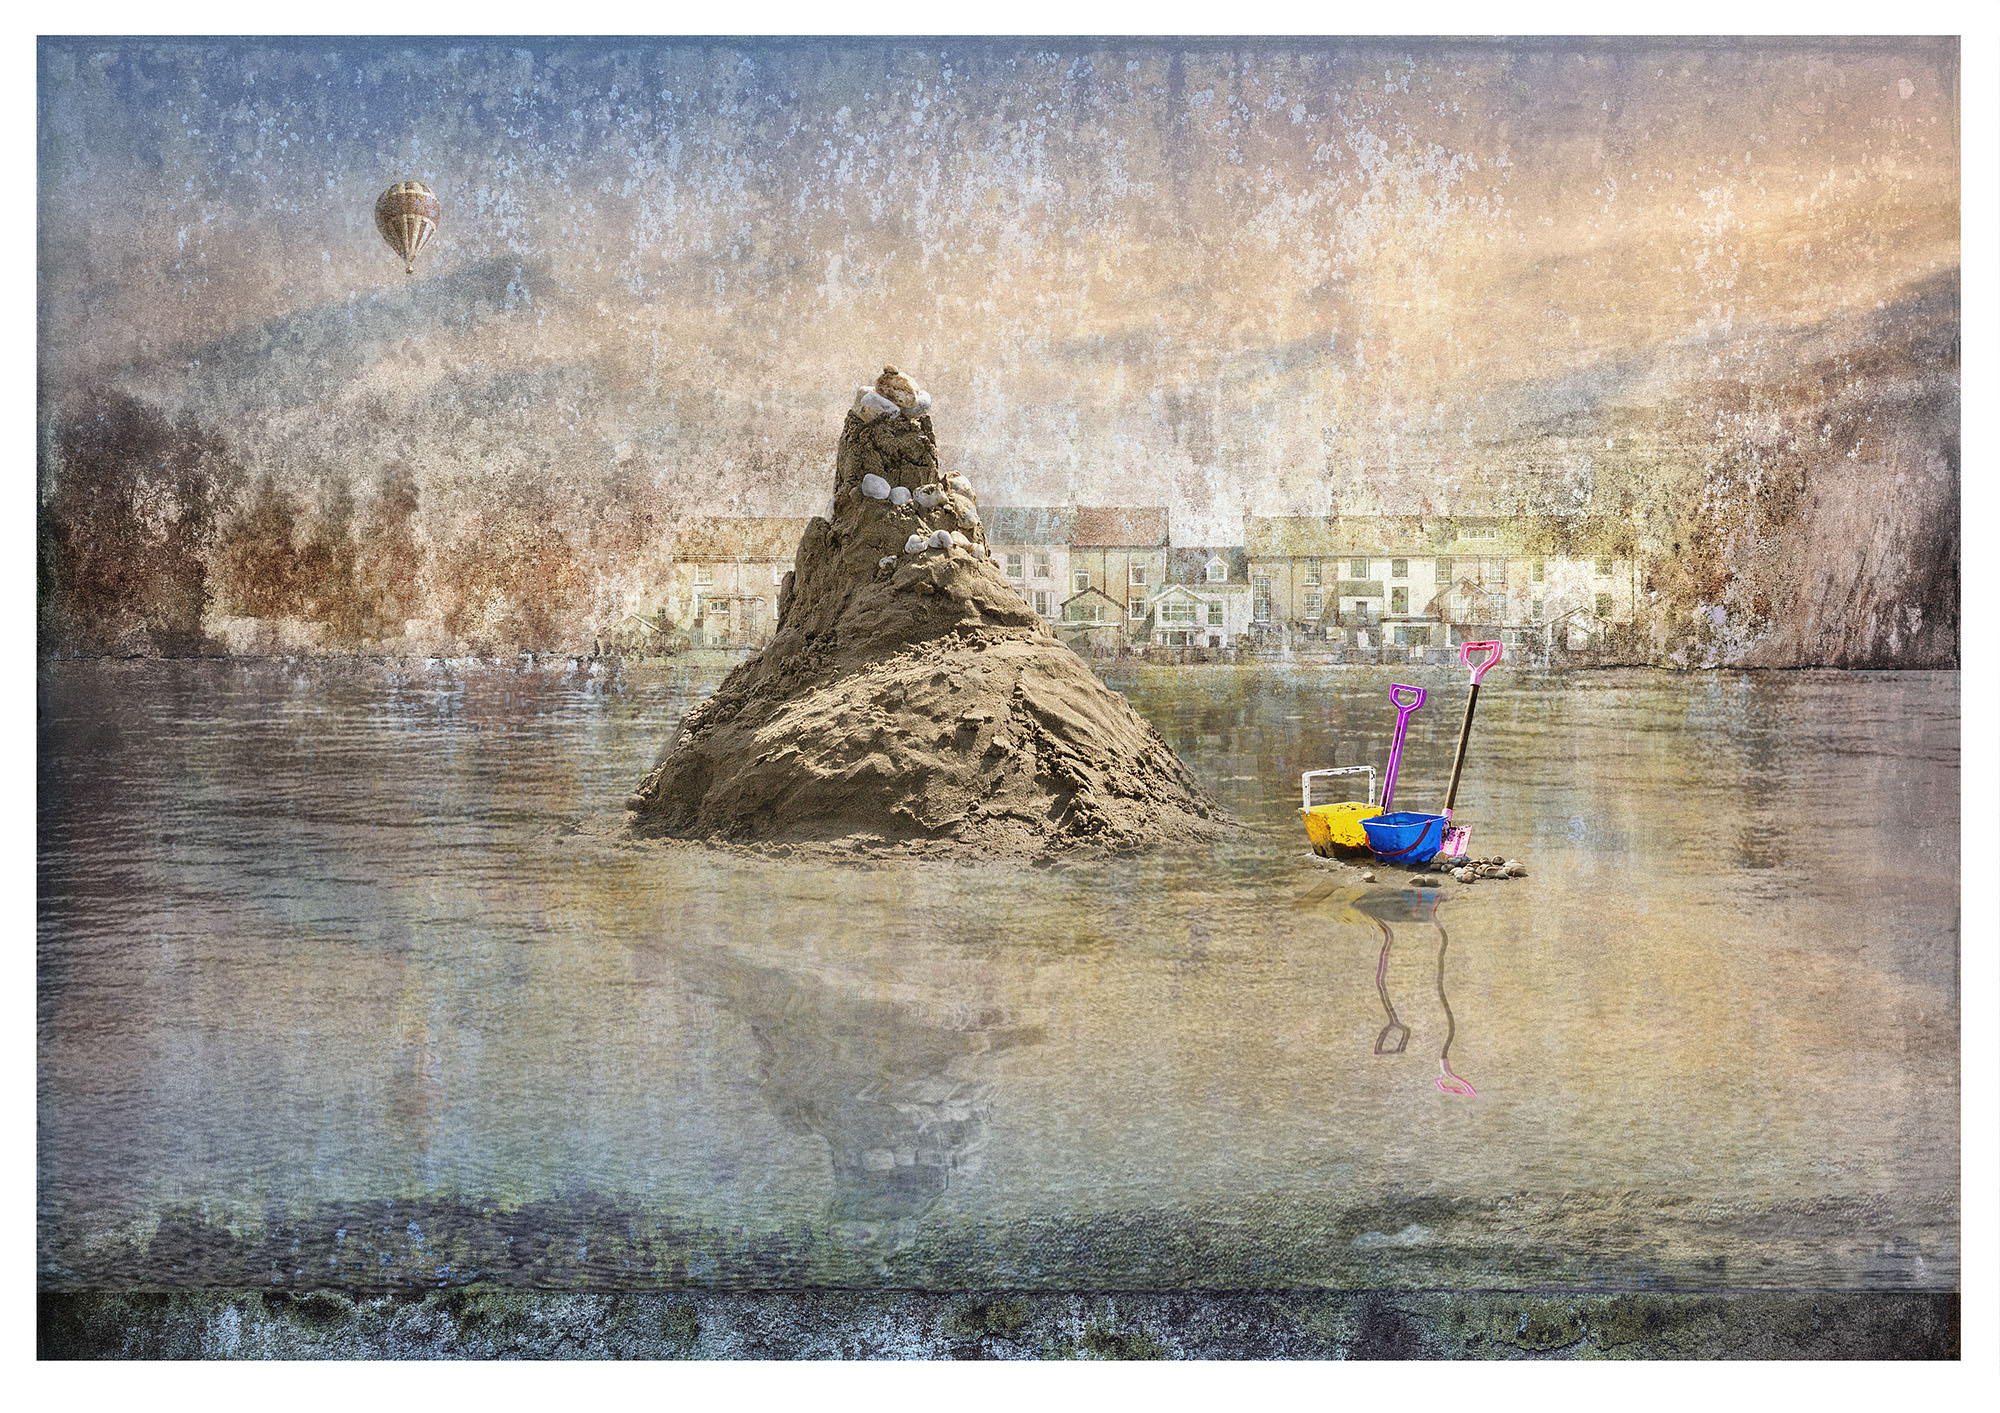 Tall roughly hewn sand castle, sits in wet sand beach with childrens bucket and spade. Warm textured overlay